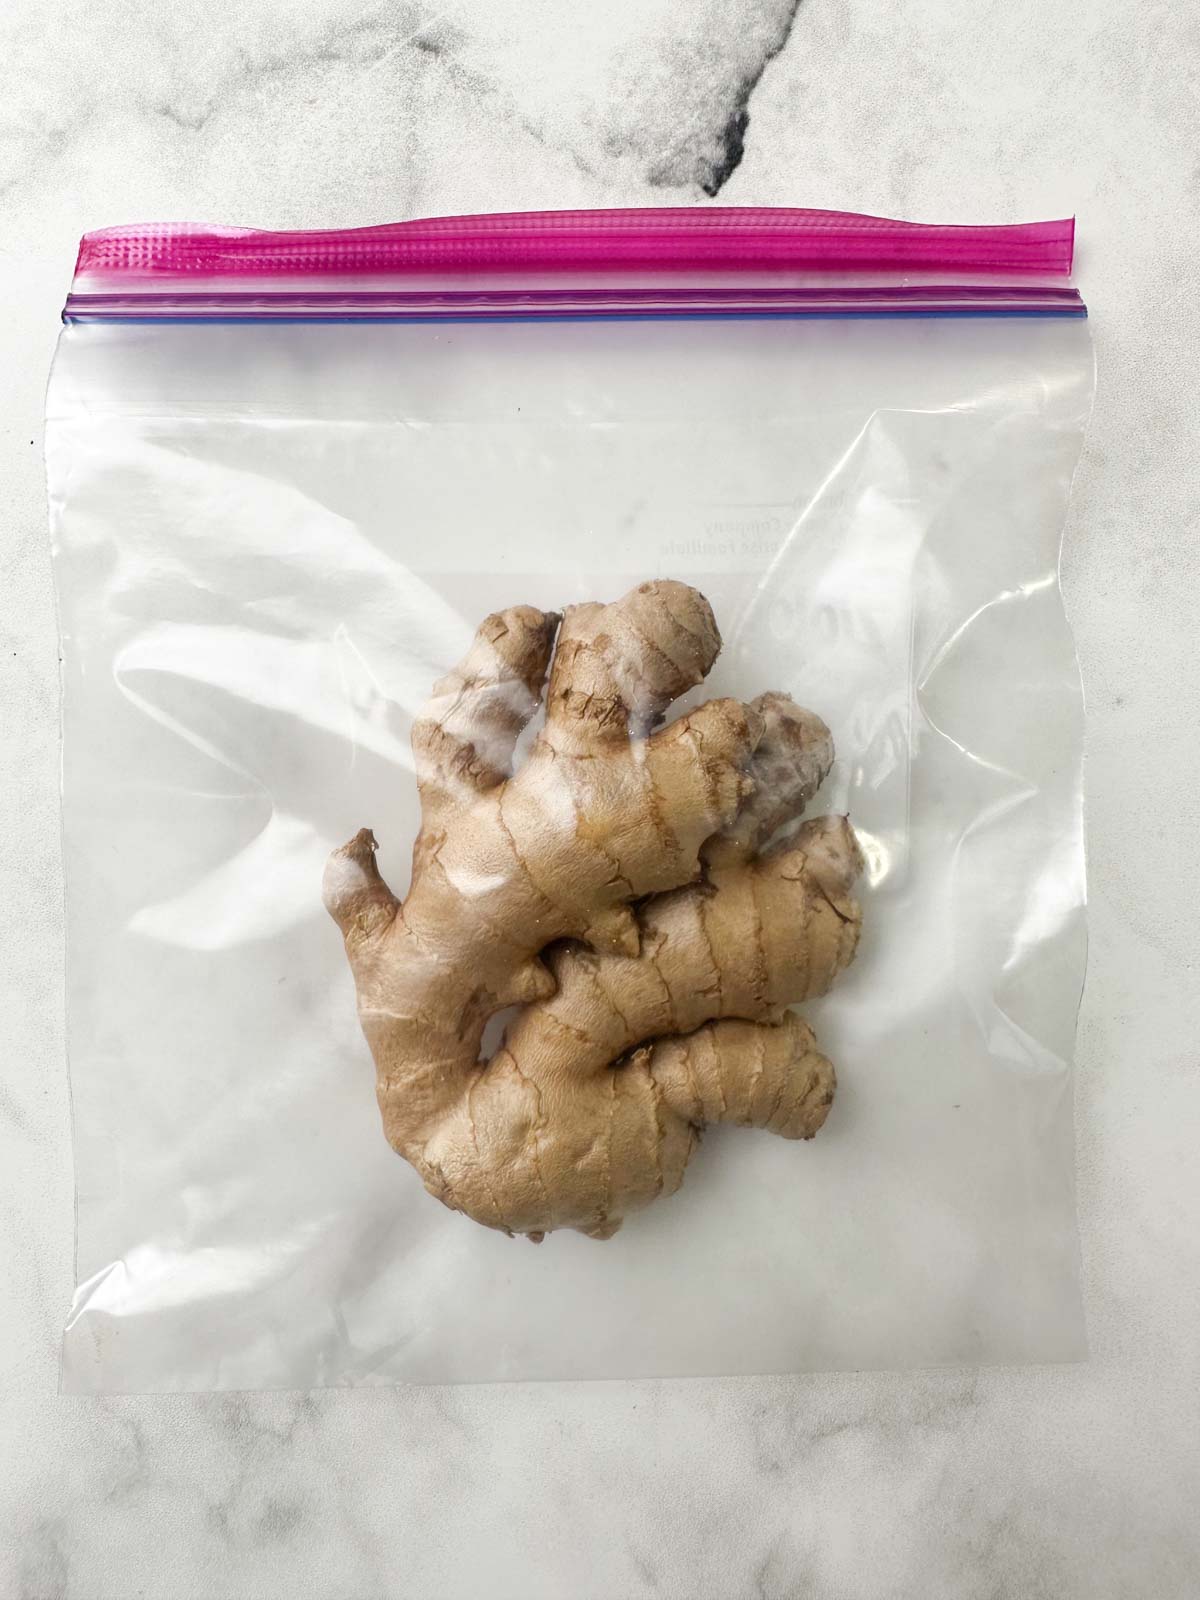 ginger root in a ziplock bag for freezing